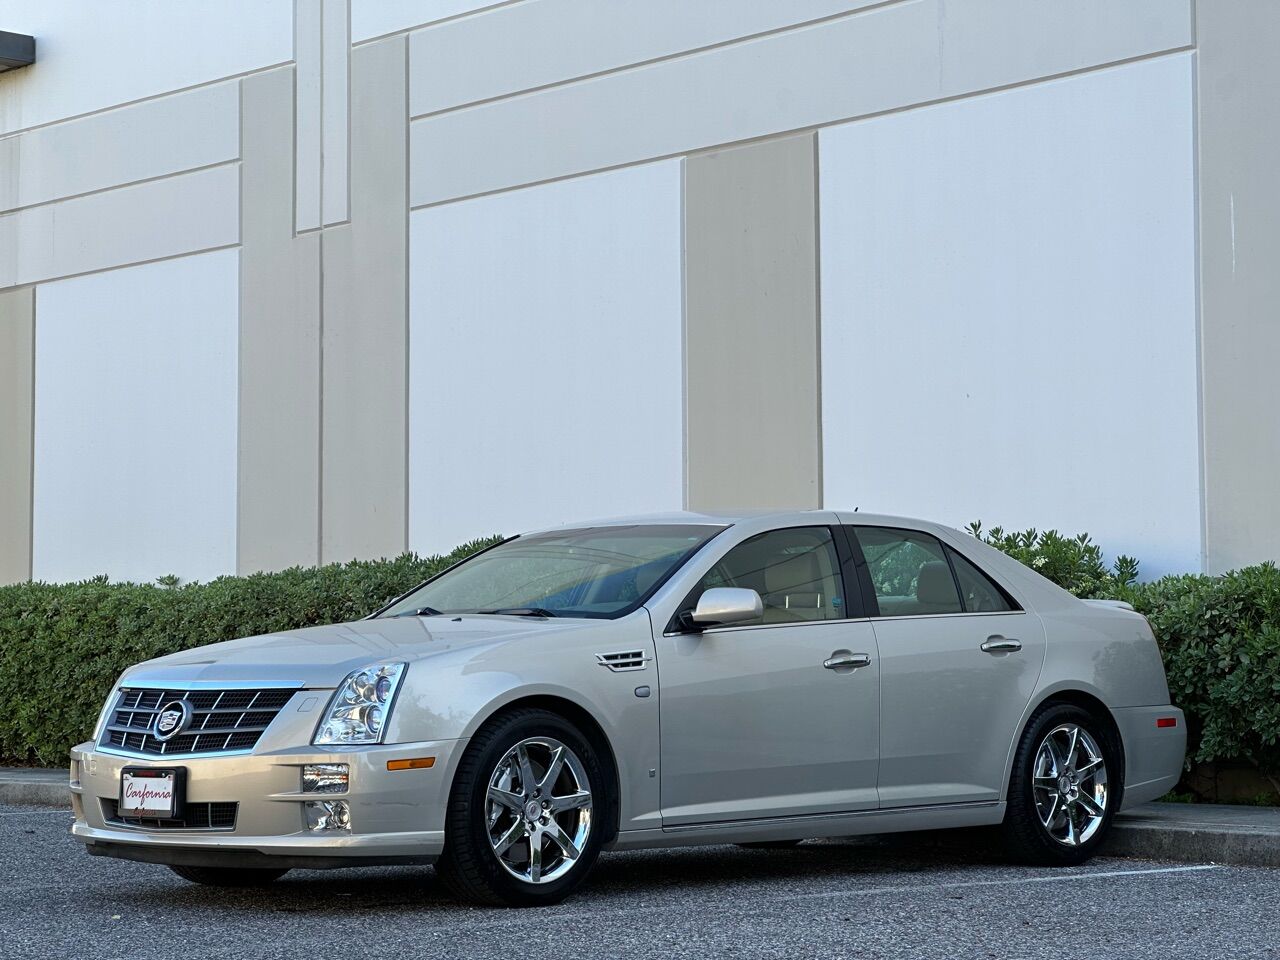 Cadillac STS For Sale - Carsforsale.com®